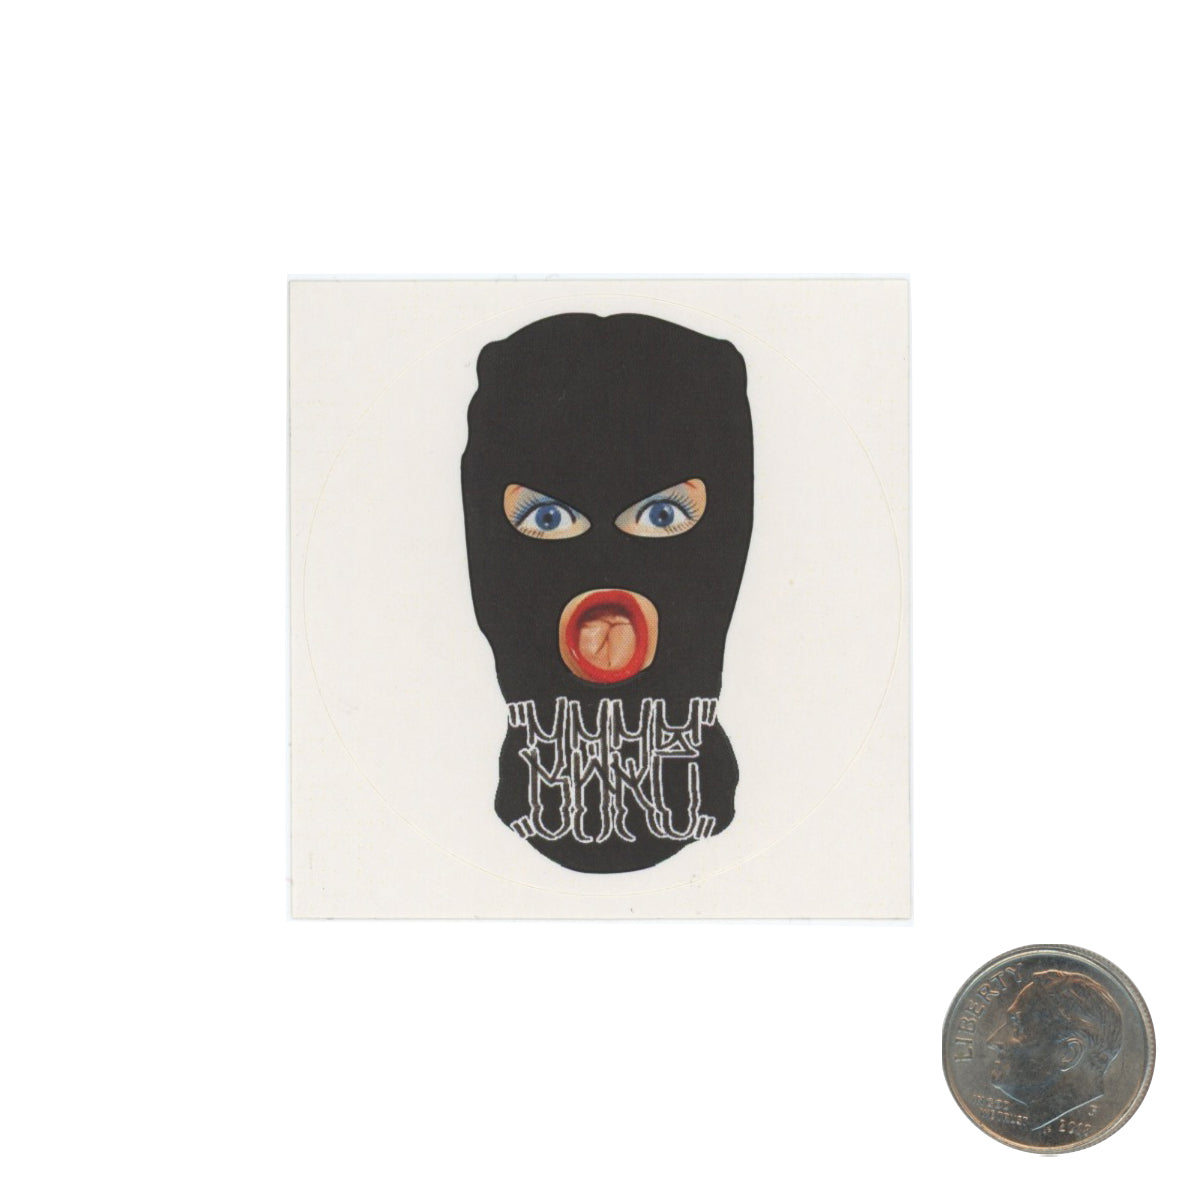 BareOne Girl in Mask Front Face Sticker with dime